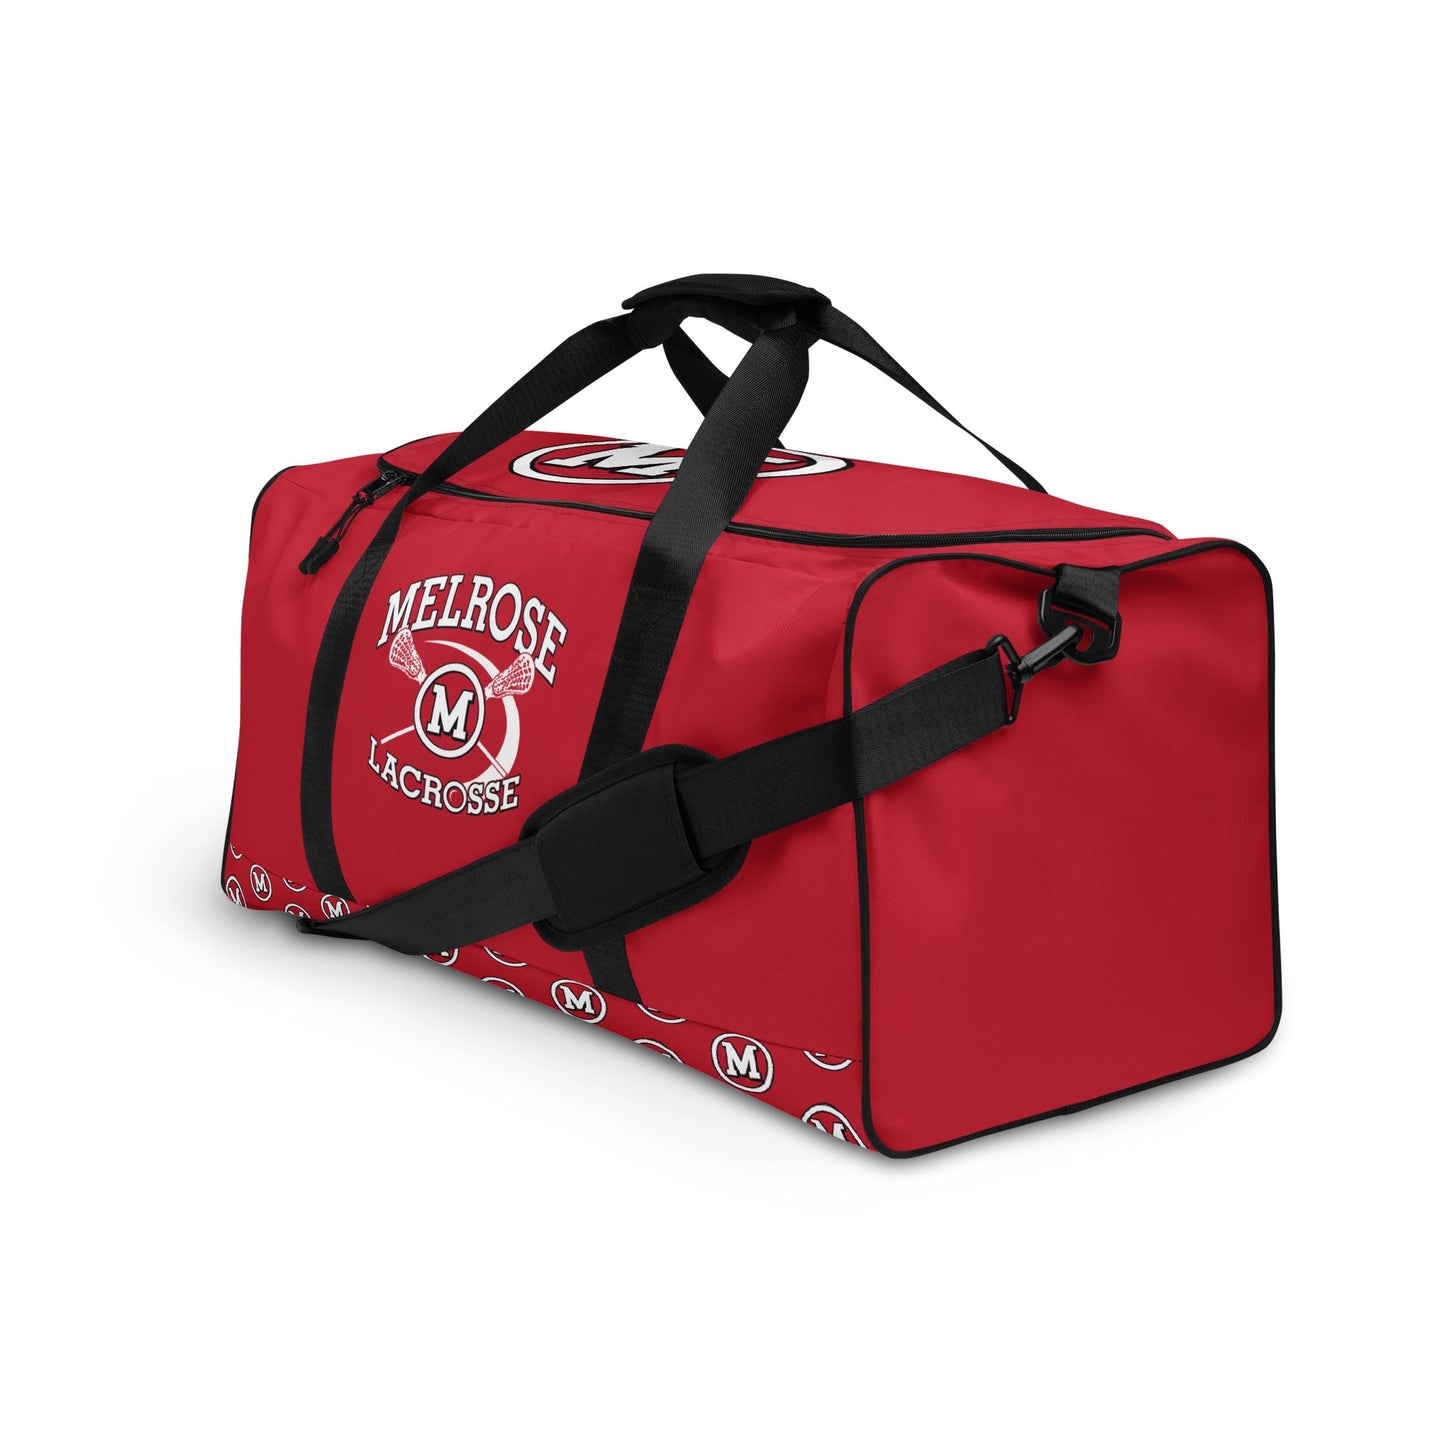 Melrose Youth LC Sideline Duffle Bag Signature Lacrosse